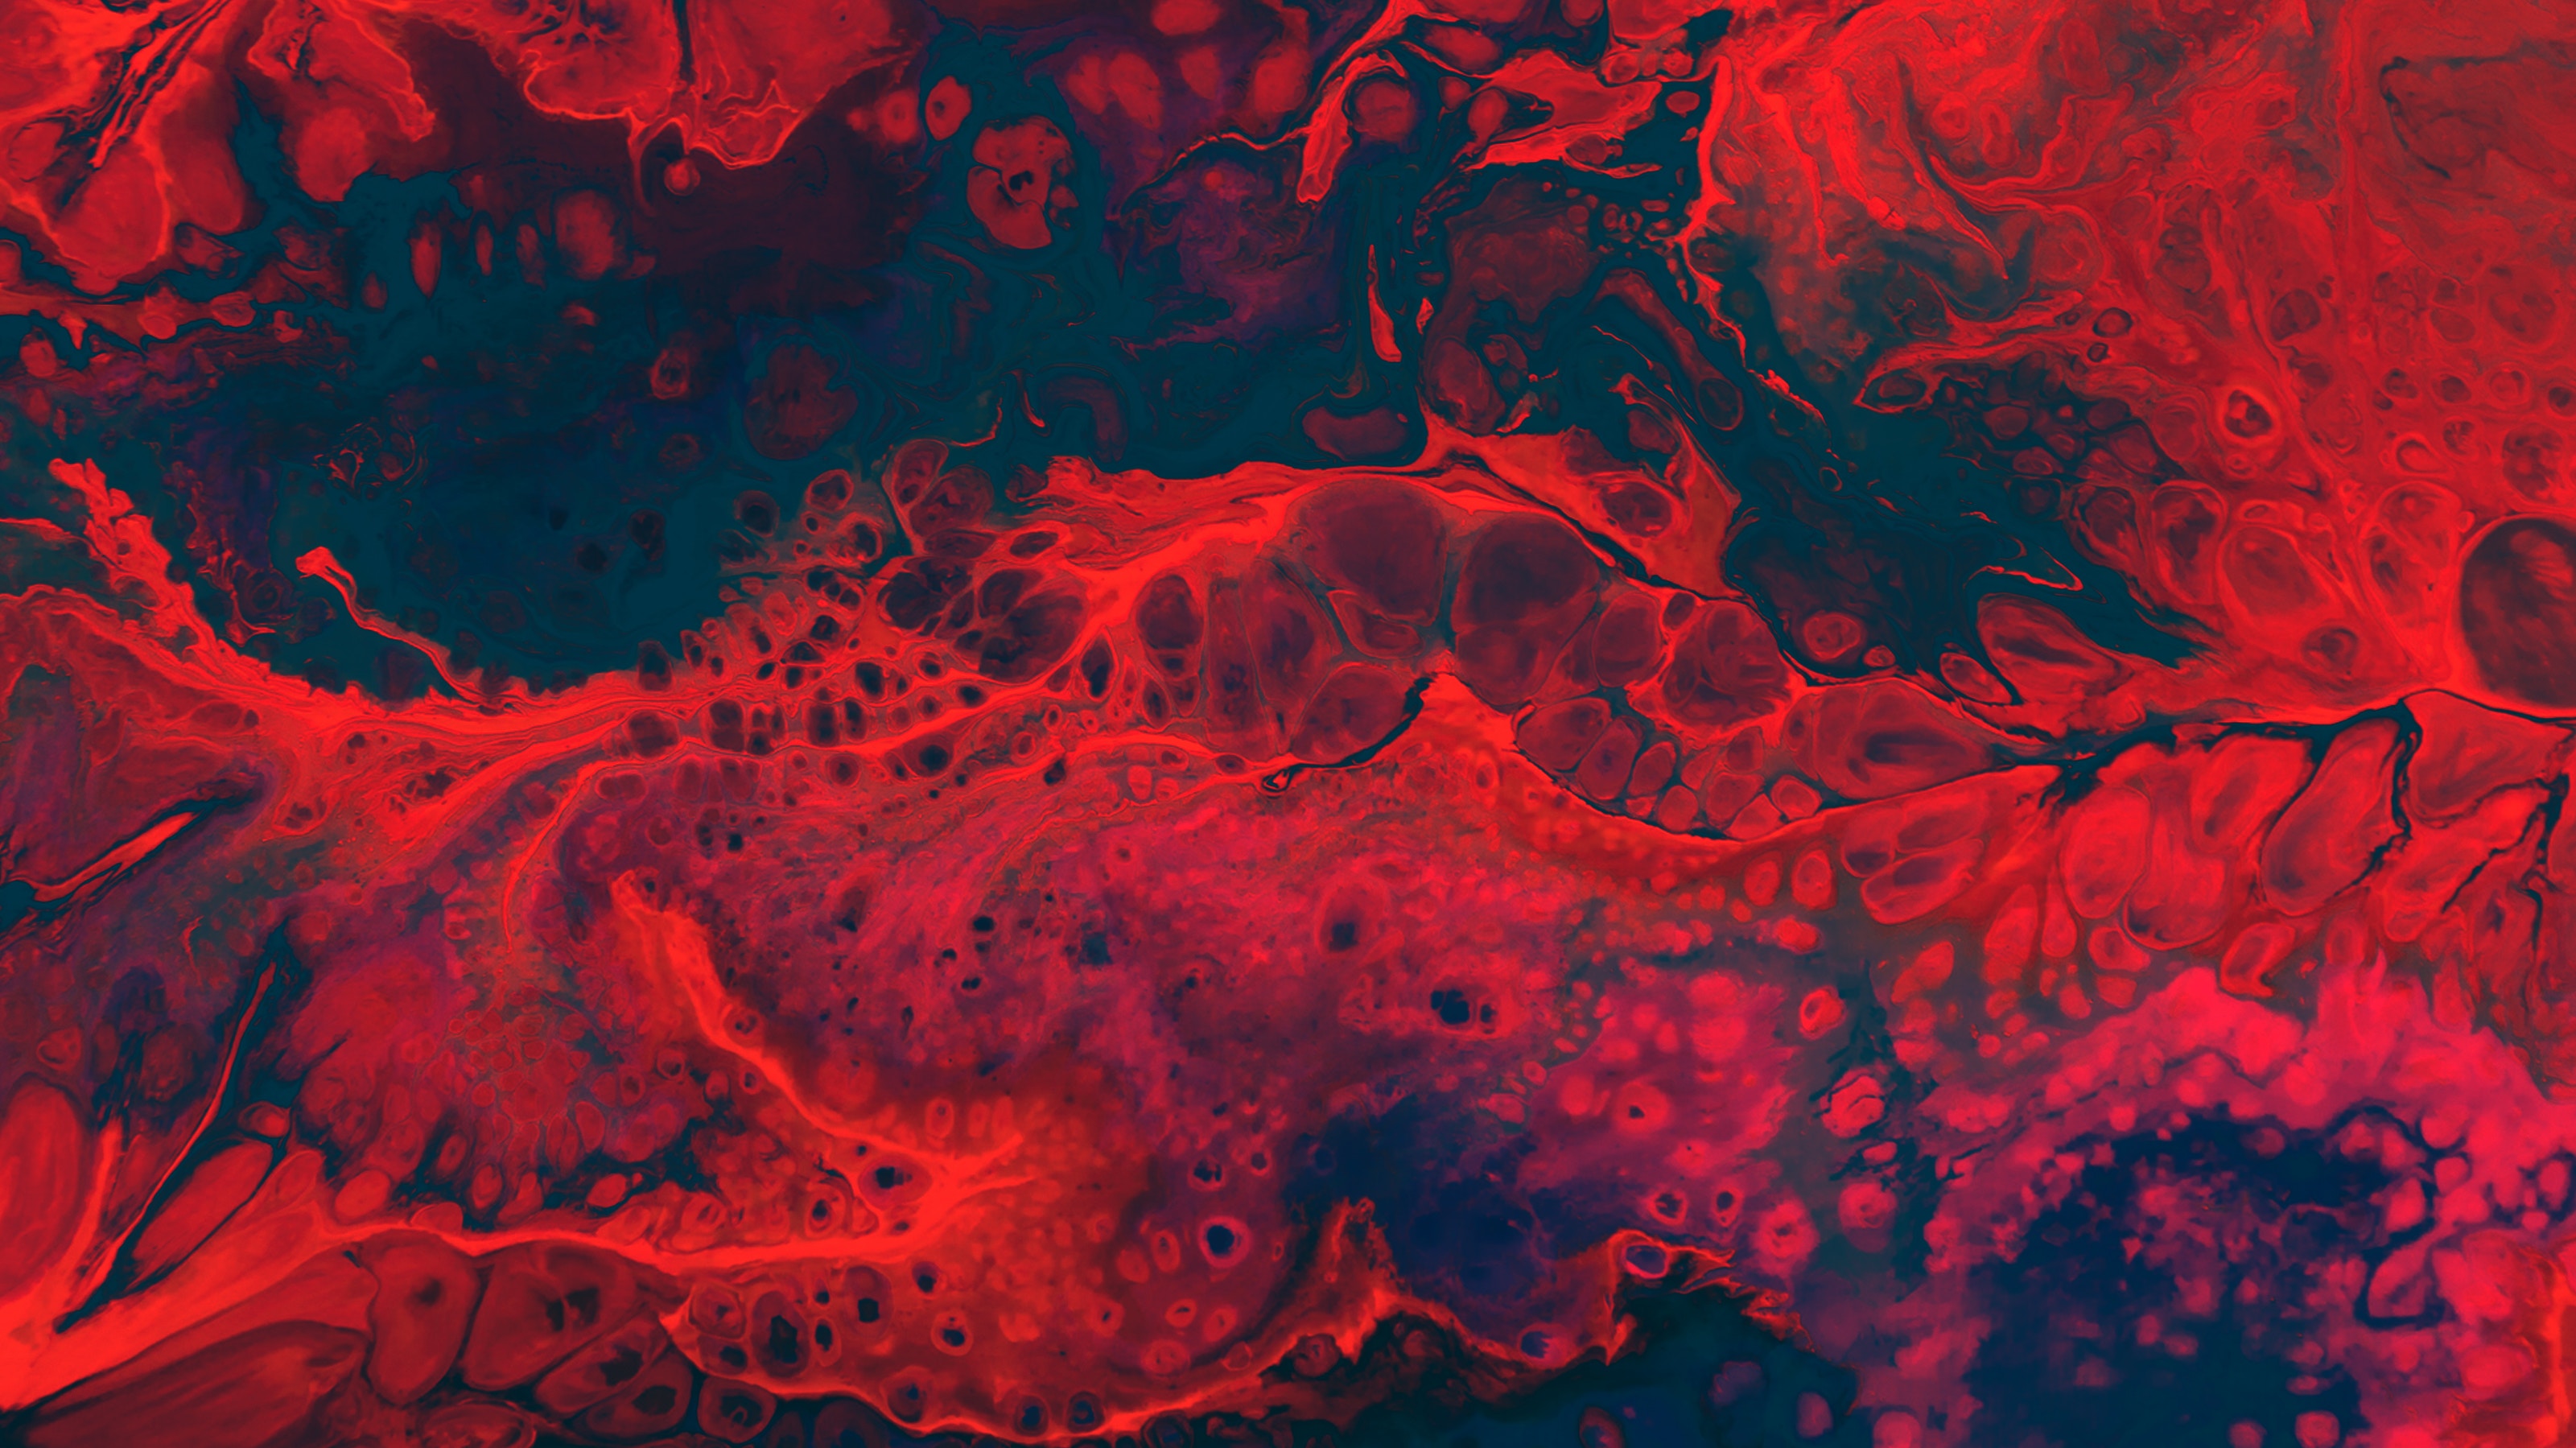 View of red, blood-like liquid patterns